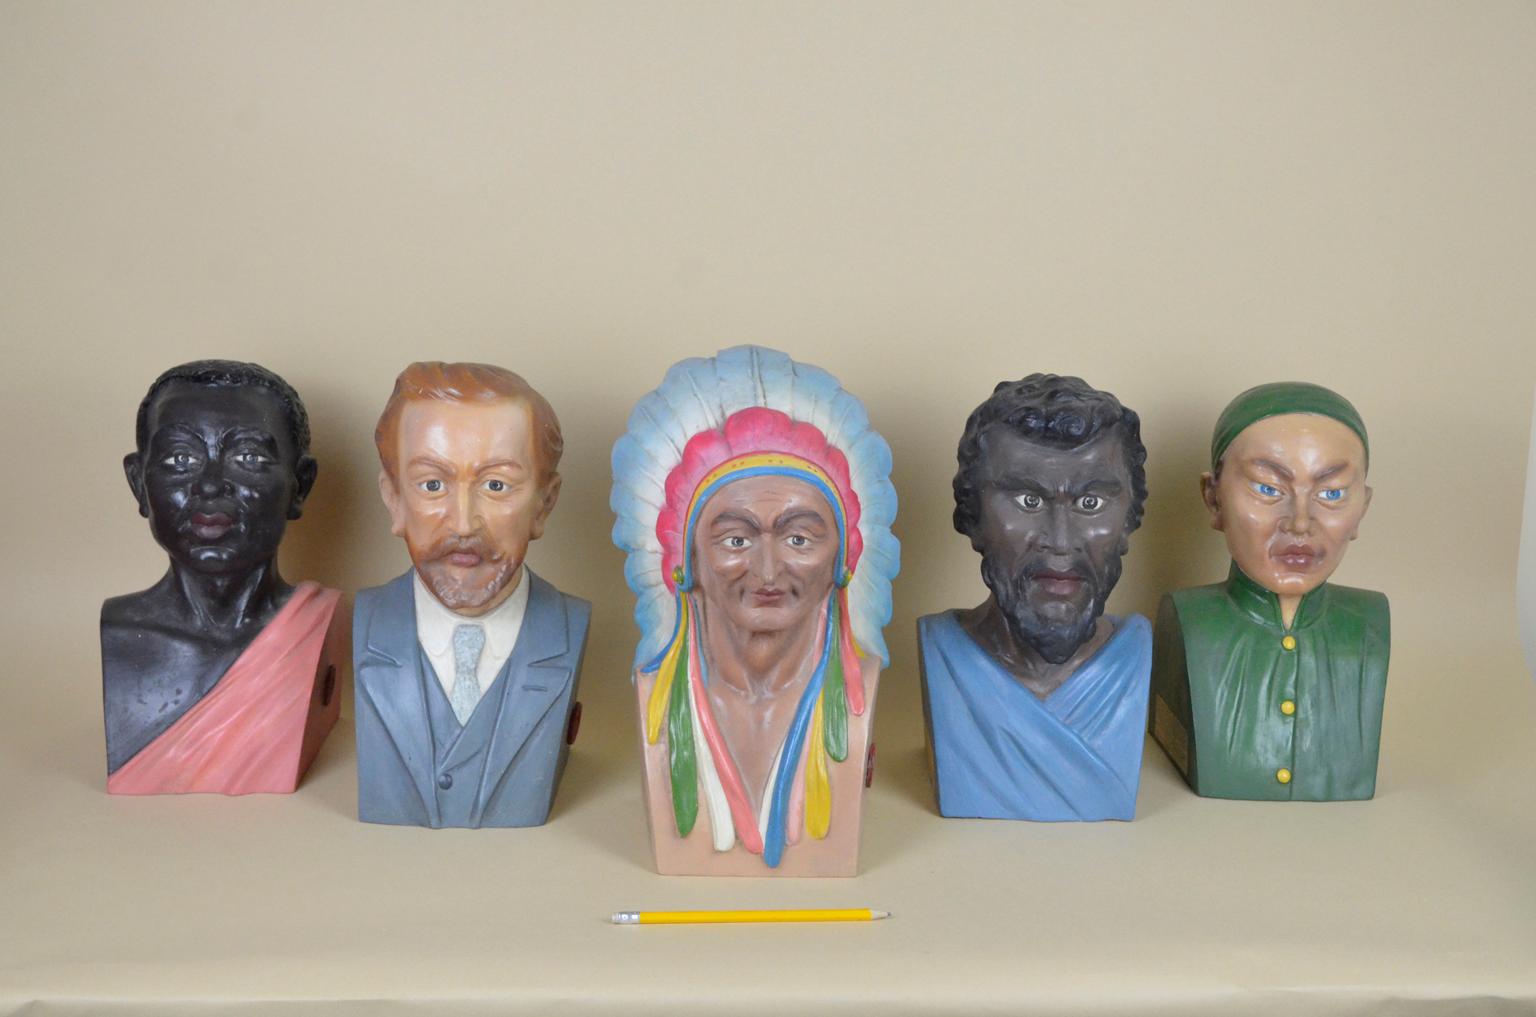 Extremely rare set of five ethnographic painted plaster busts realized in the 1920s ca by Produzione Scientifica Paravia in Turin, Italy.

Each bust describes one of five different ethnographic group using the scientific standards and knowledge of